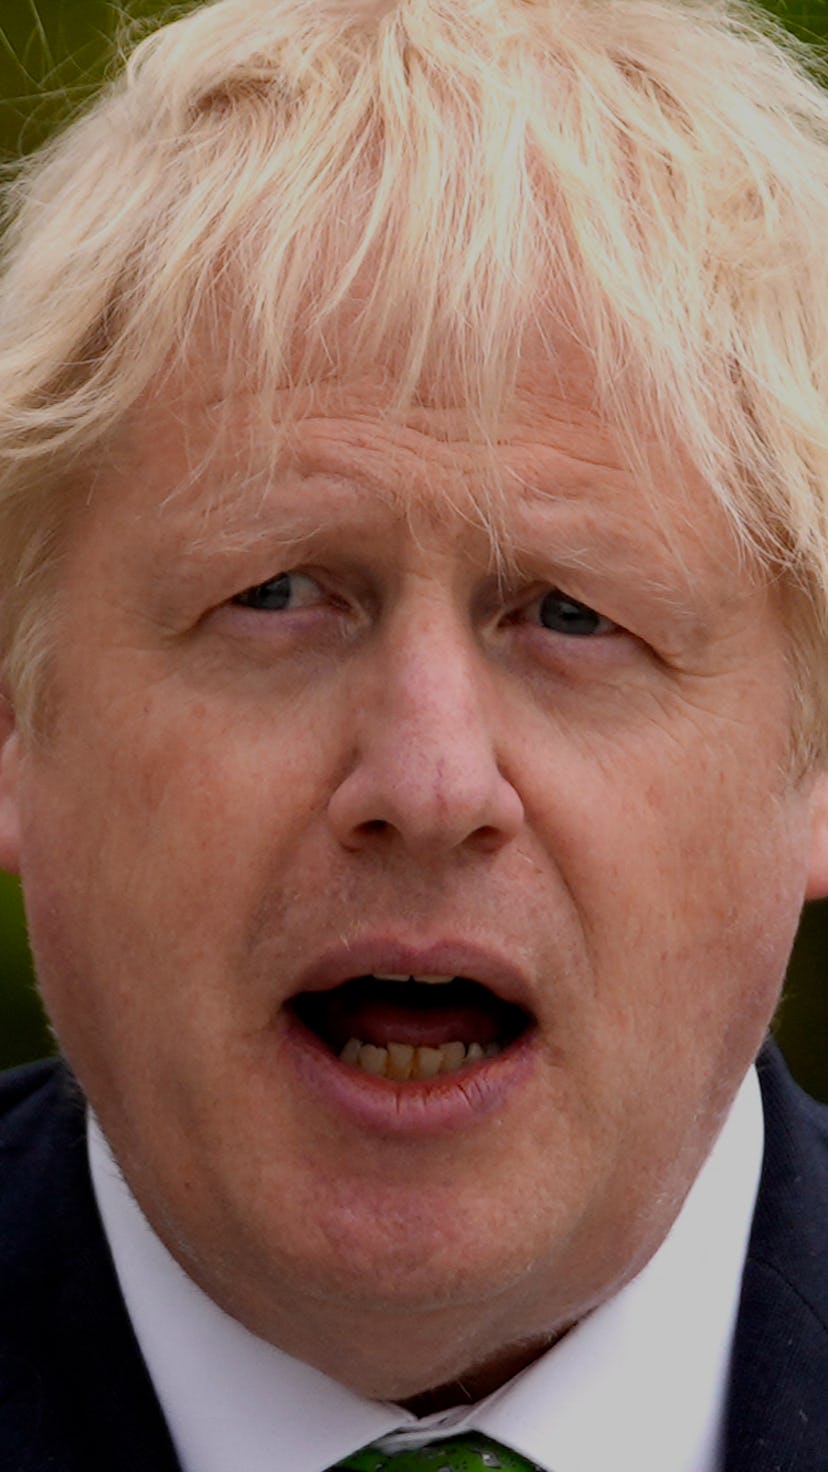 British Prime Minister Boris Johnson addresses a press conference with Sweden's Prime Minister at th...